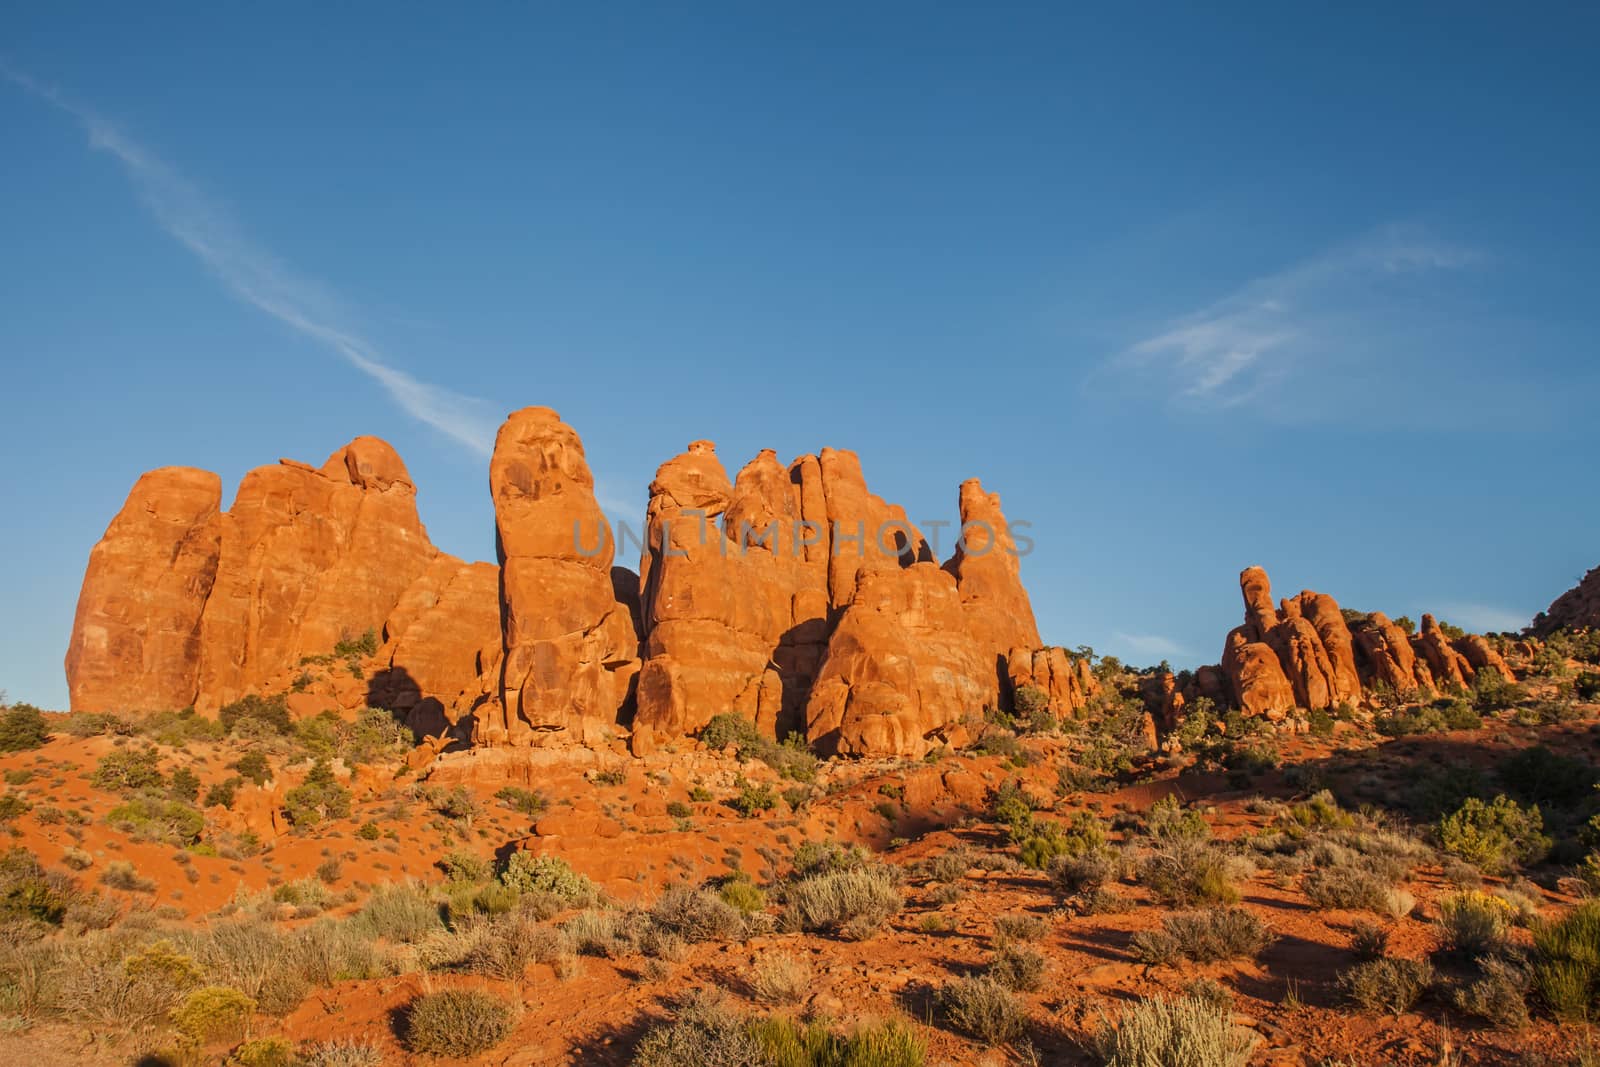 Interesting rock formations in the Devils Garden Area of Arches National Park, Utah